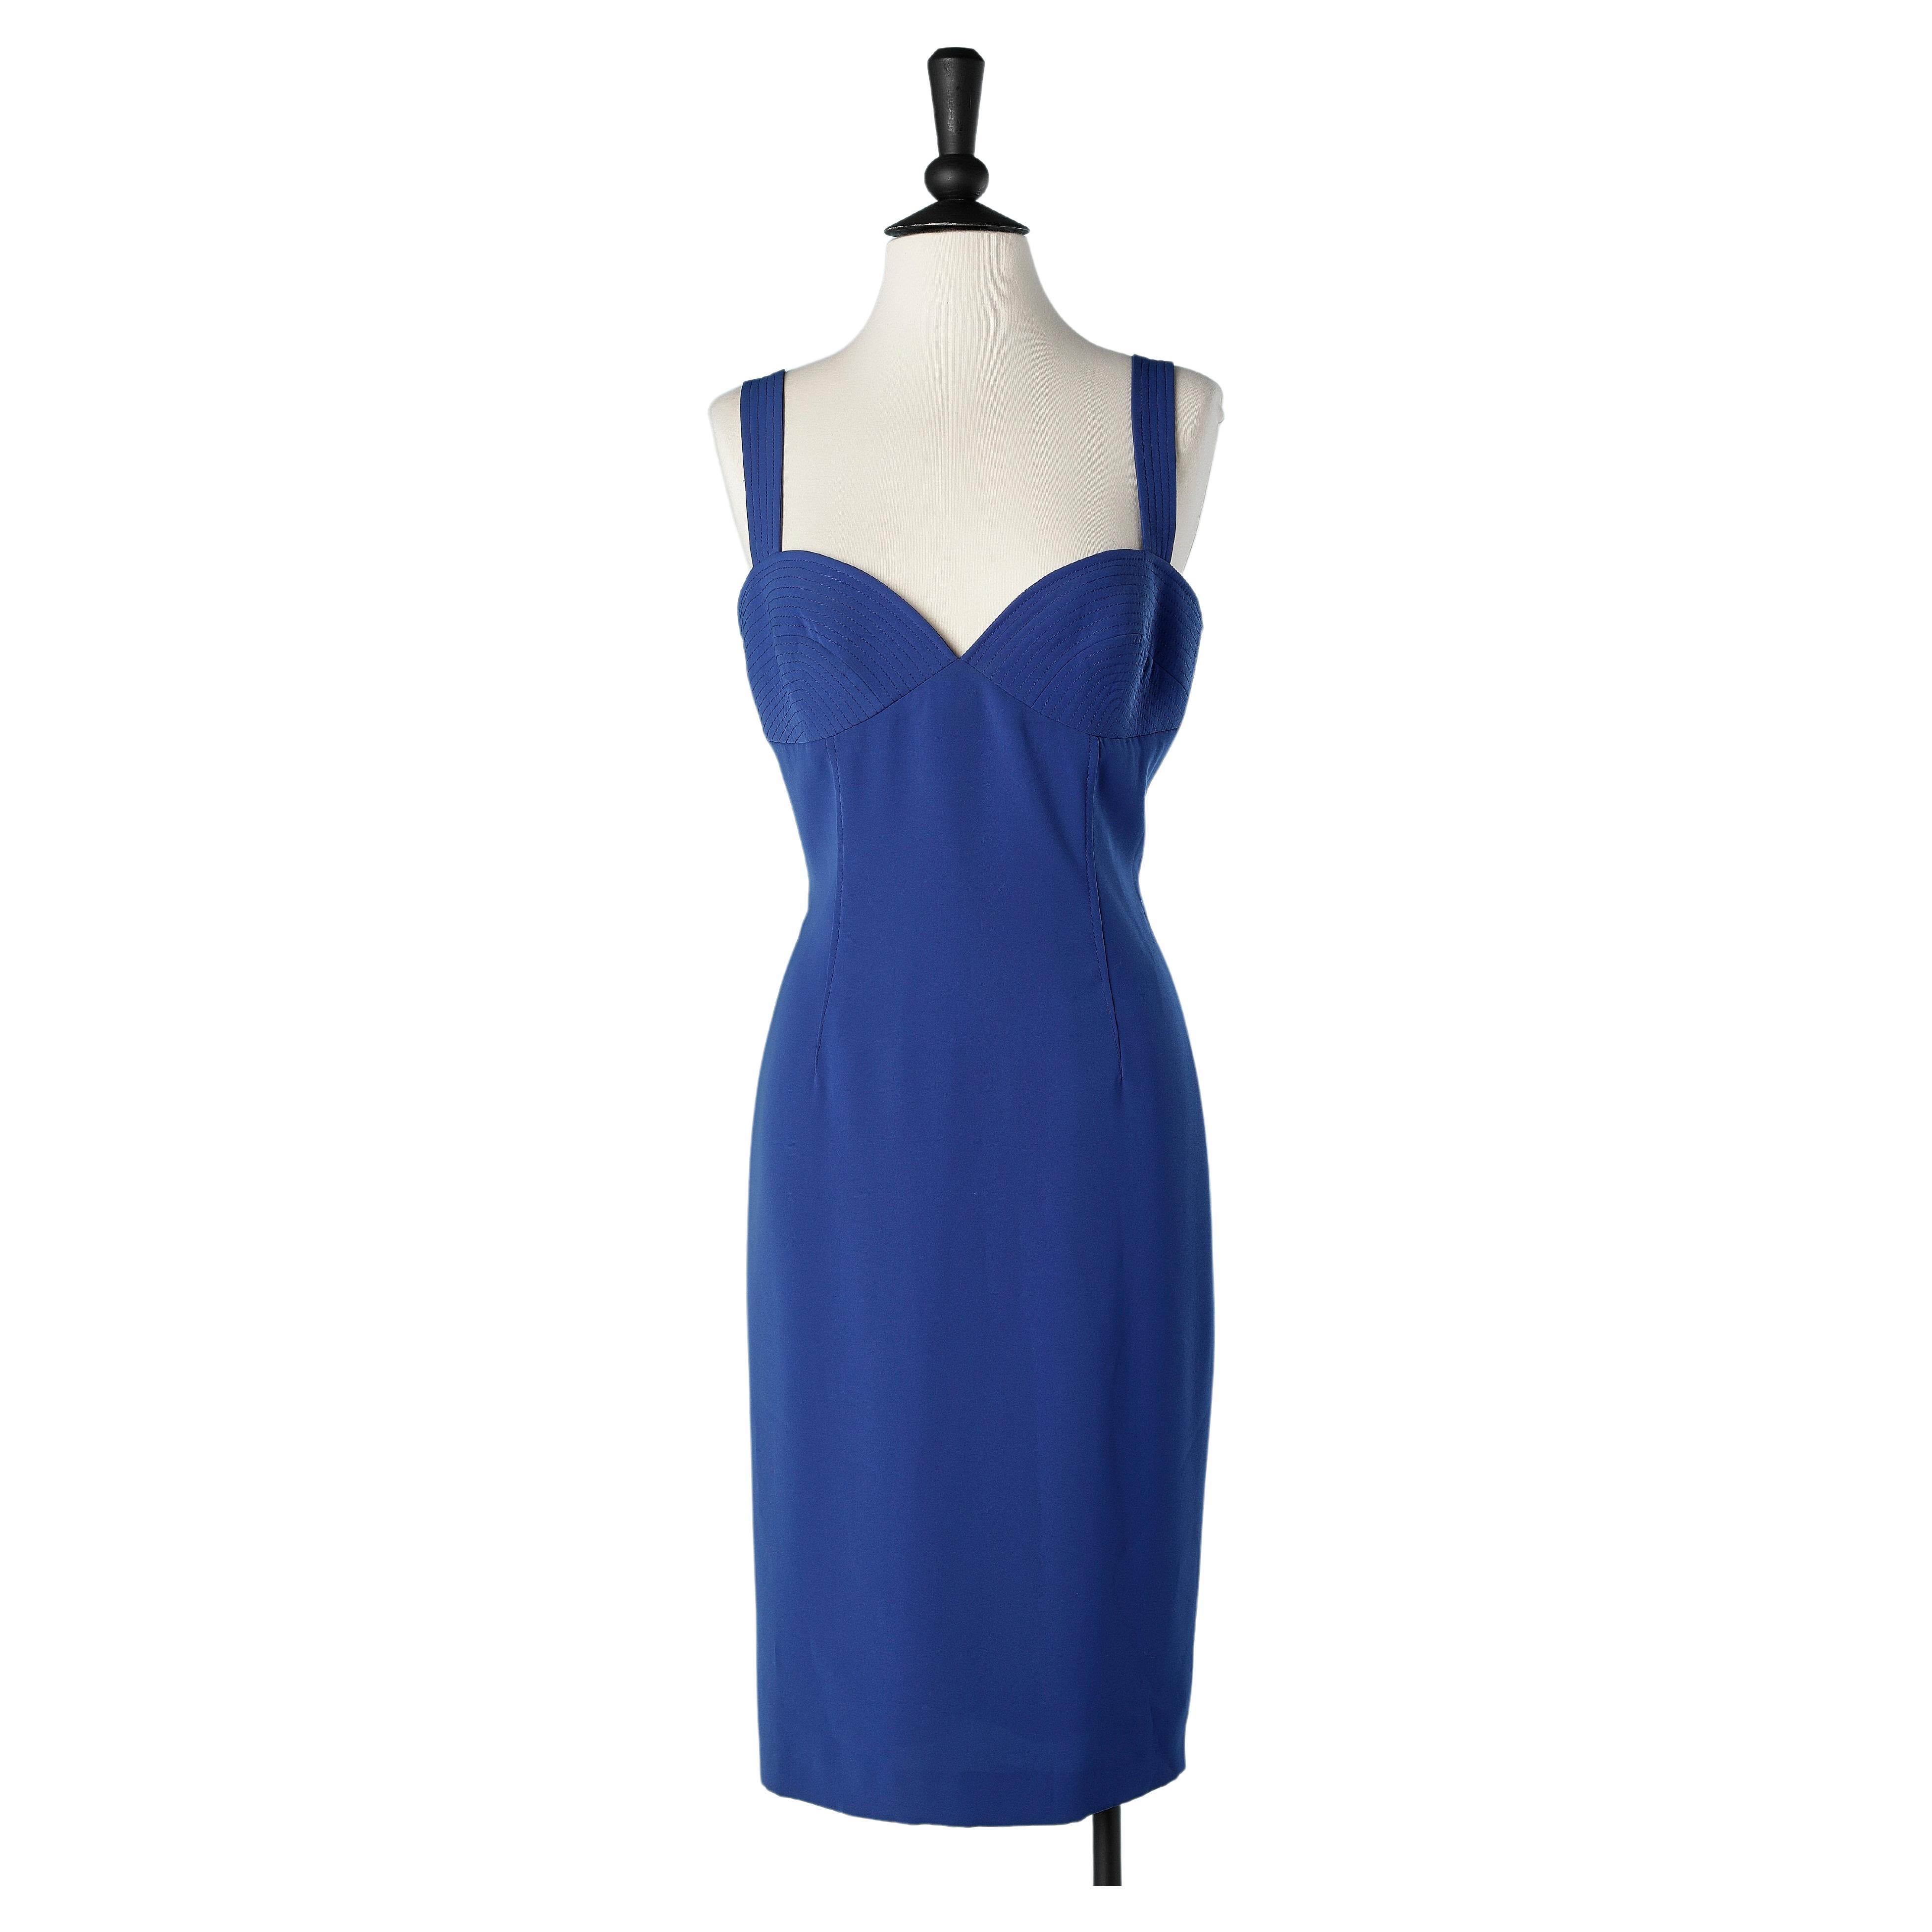 Blue cocktail dress with top-stitched bust Gianni Versace ( no brand tag) For Sale